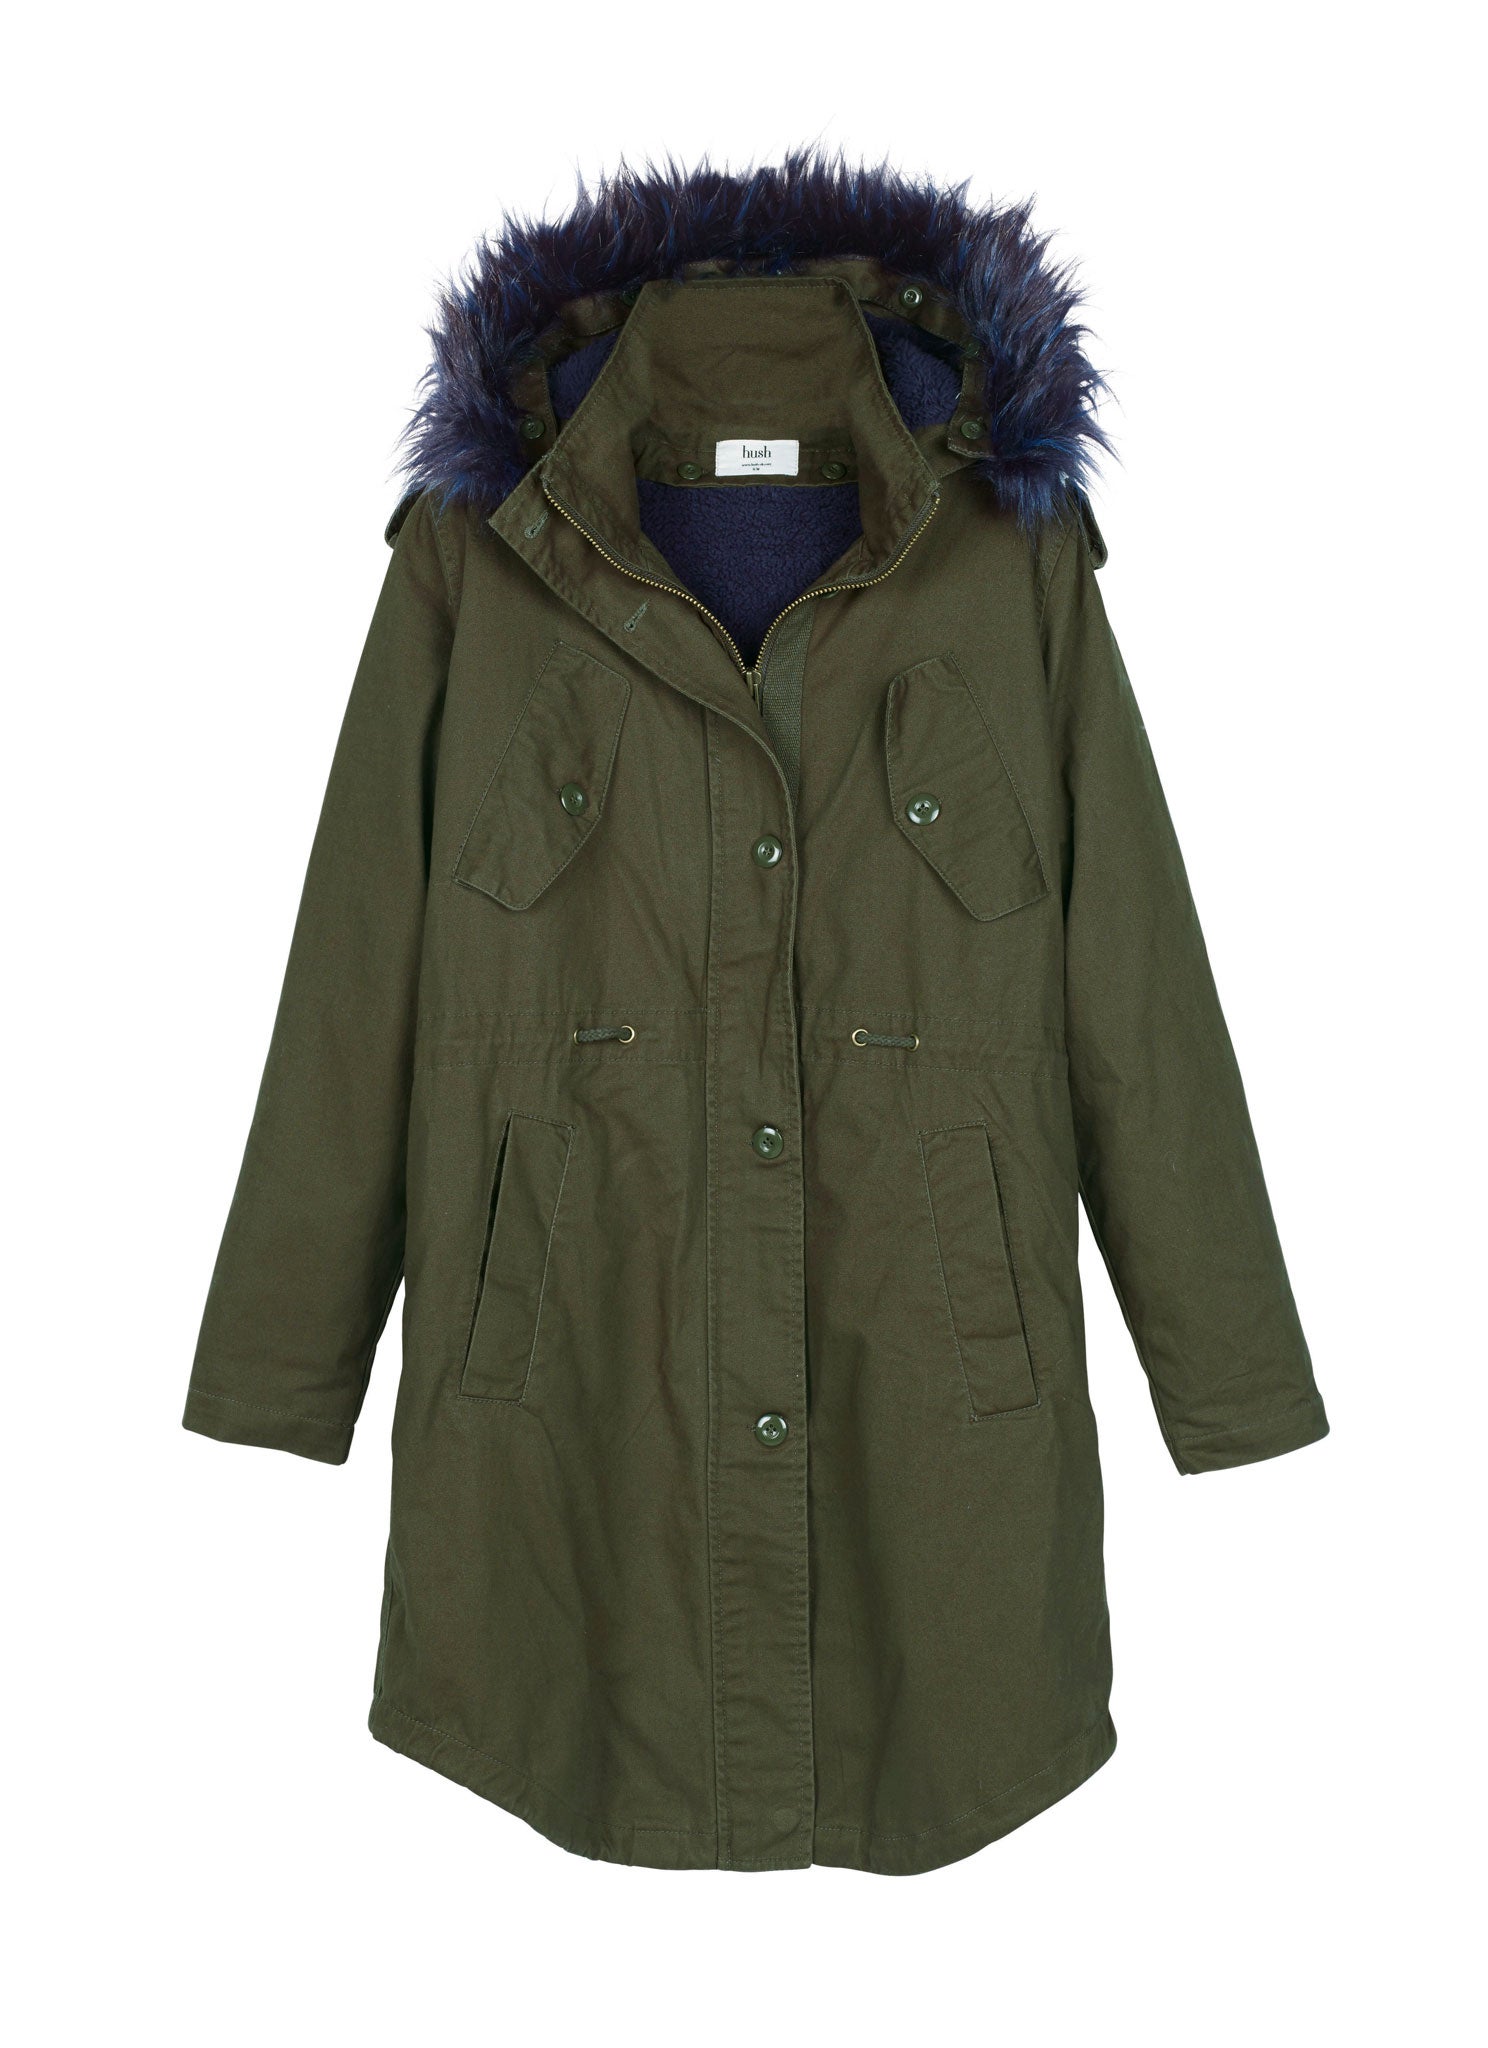 Coat with contrasting navy lining and trim from Hush, £170, hush-uk.com